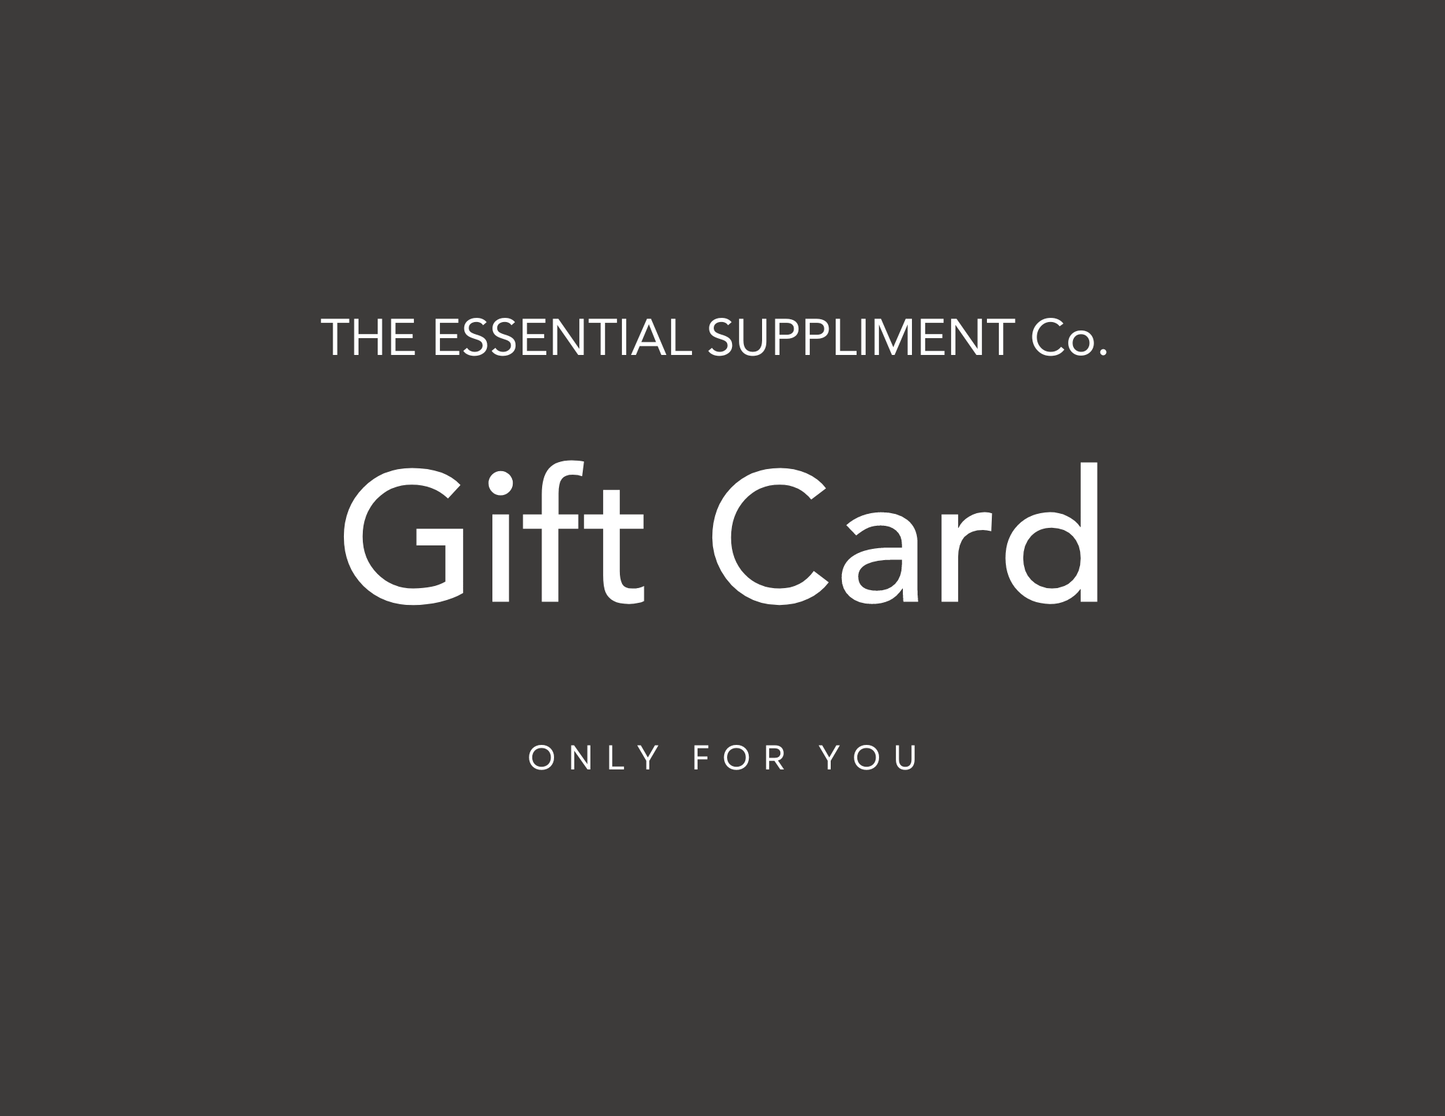 The Essential Supplement Co. Gift Card